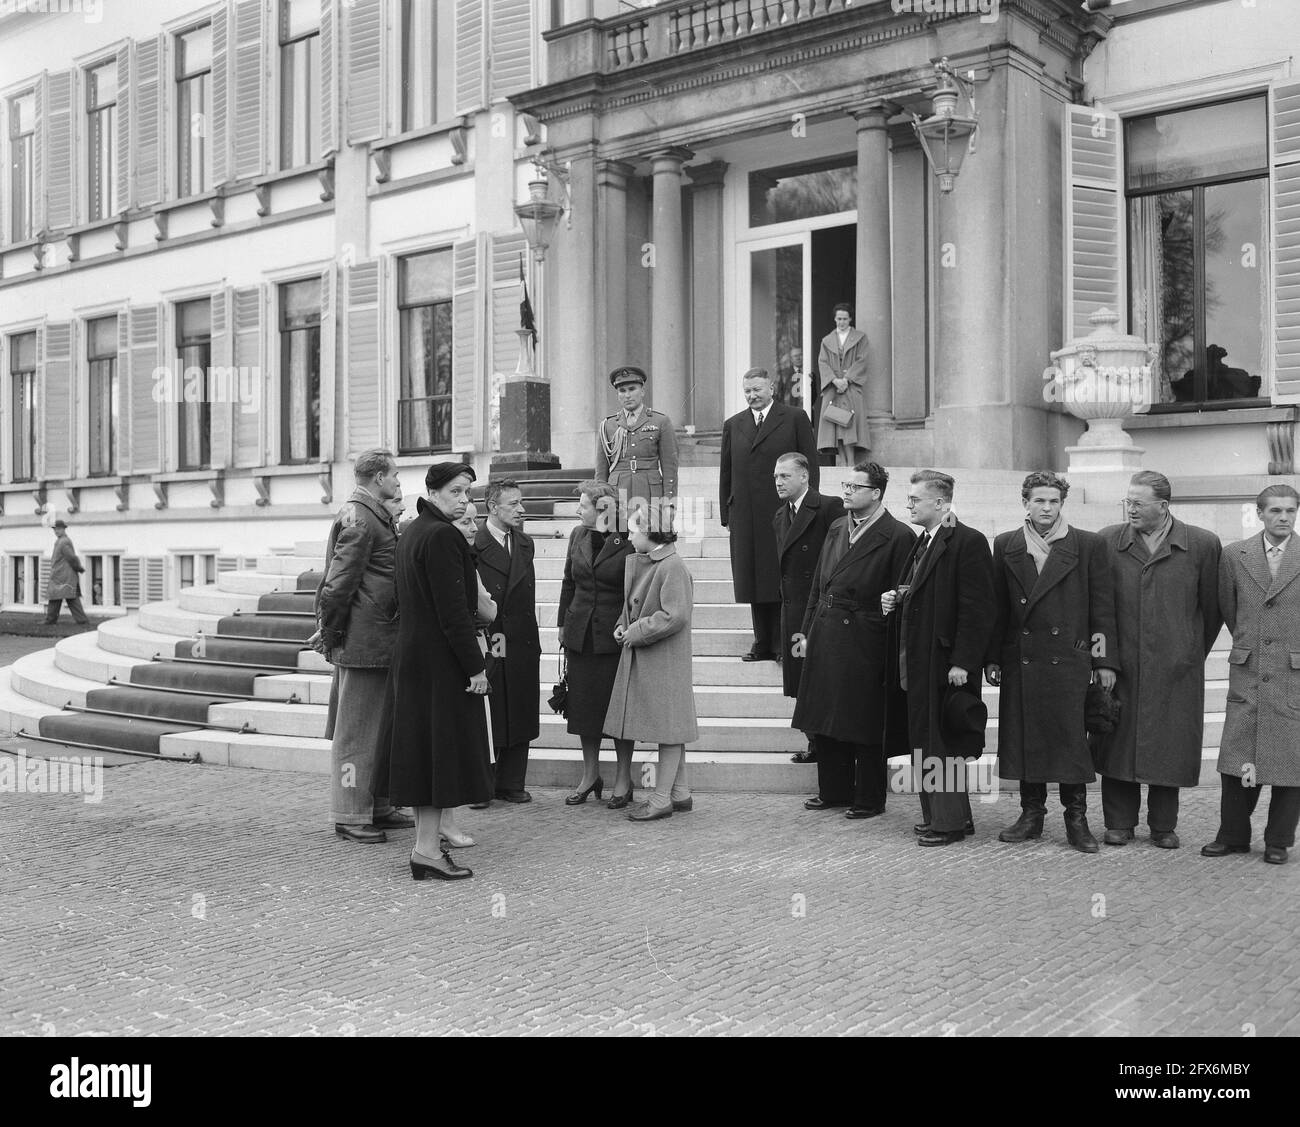 Hungarian refugees with the Queen at Soestdijk, November 27, 1956, KINGIN, FLIGHTS, The Netherlands, 20th century press agency photo, news to remember, documentary, historic photography 1945-1990, visual stories, human history of the Twentieth Century, capturing moments in time Stock Photo